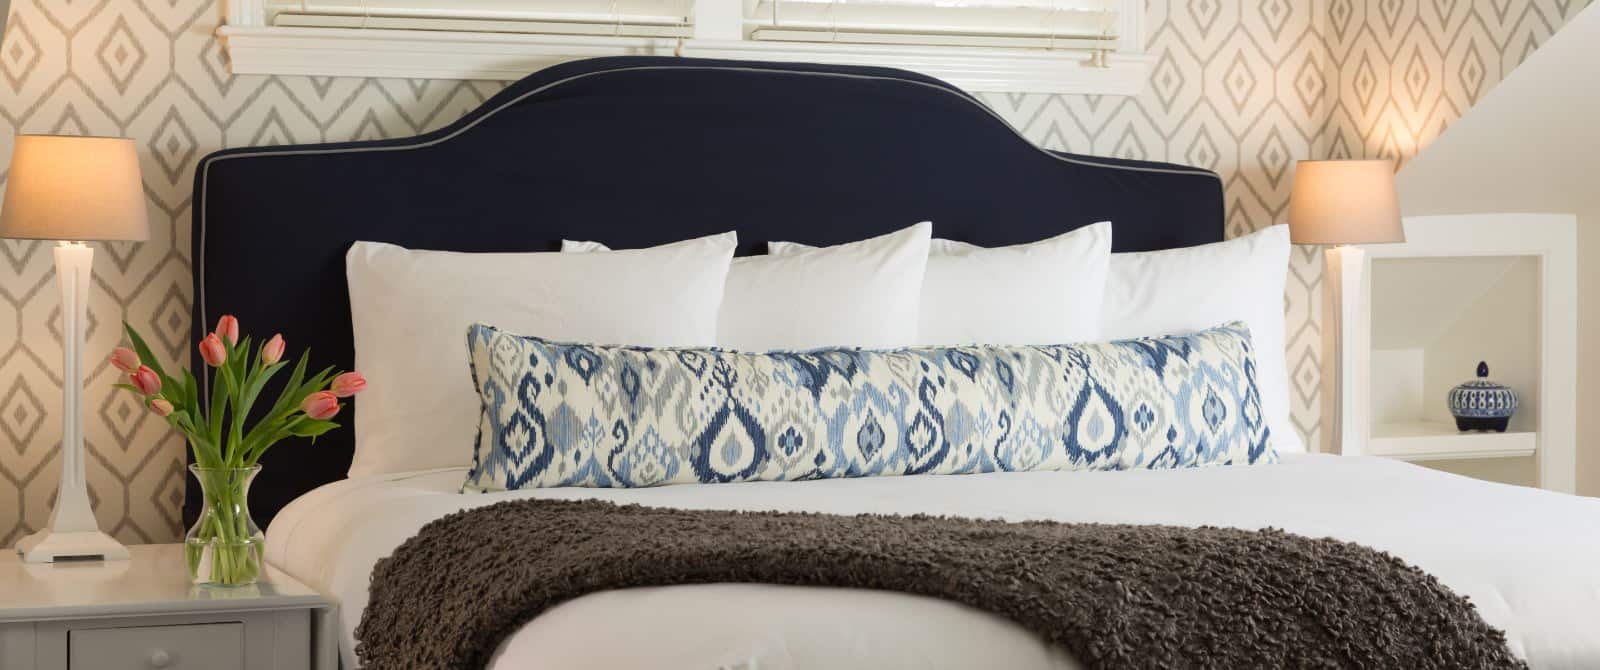 Bedroom with navy upholstered headboard, white bedding, and long pillow with hues of blue